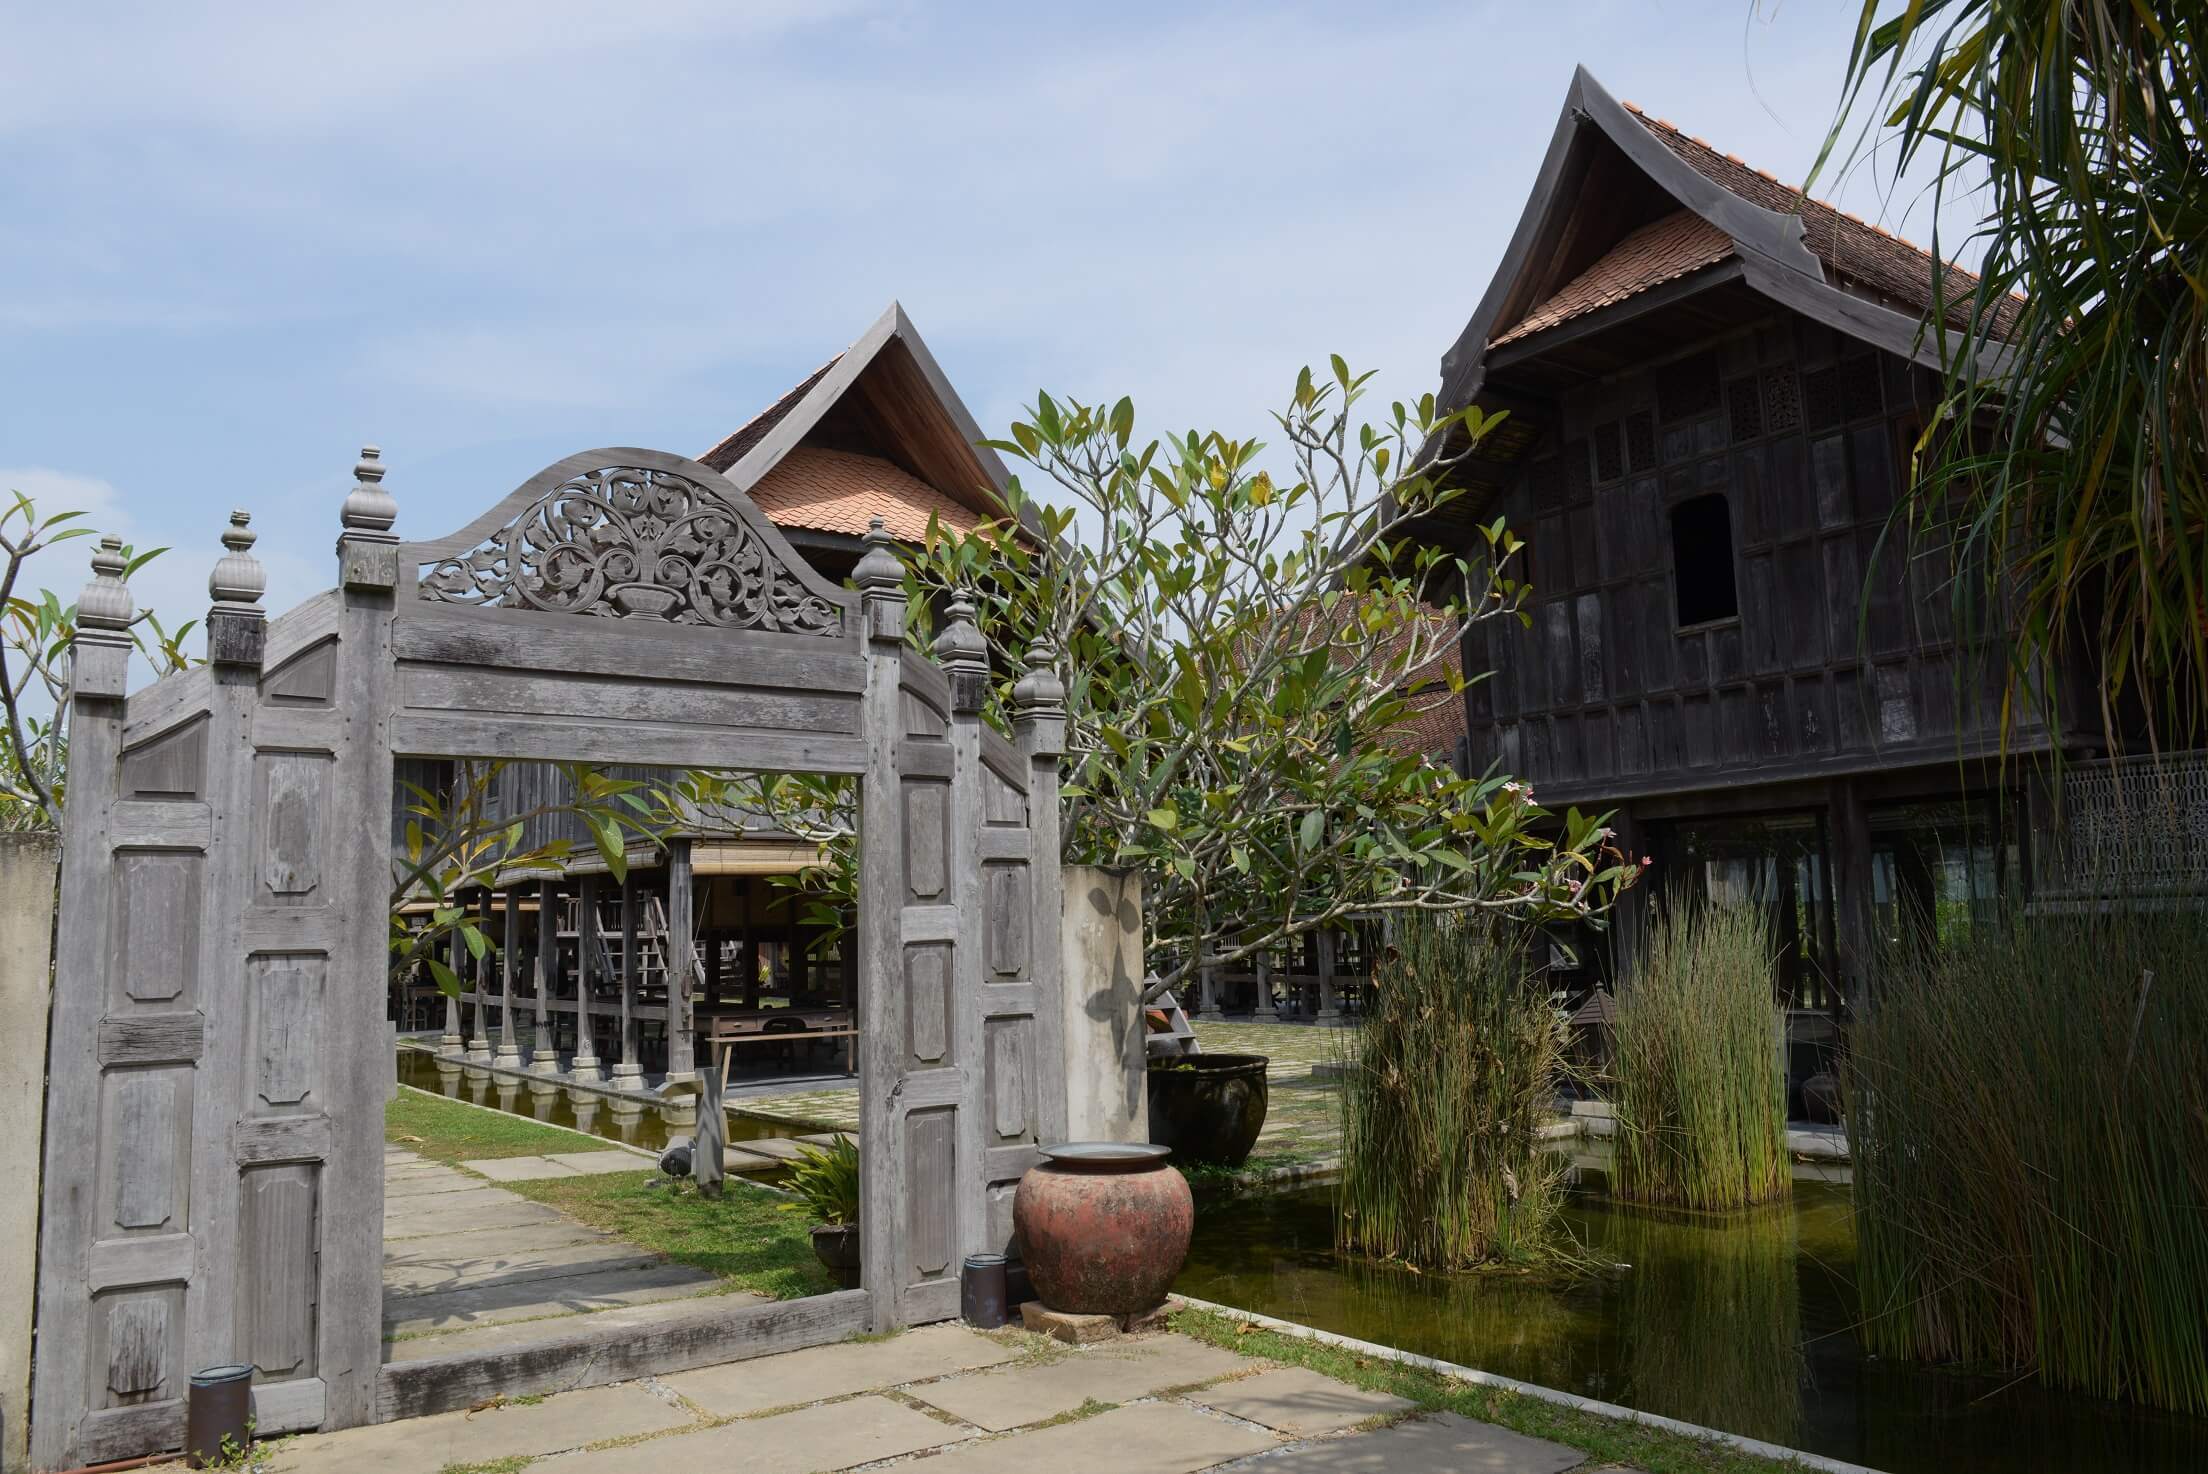 Travel back in time while relaxing in one of carefully restored villas on the property, which aims to gently revive appreciation for Malay heritage. Photo courtesy of Terrapuri Heritage Village